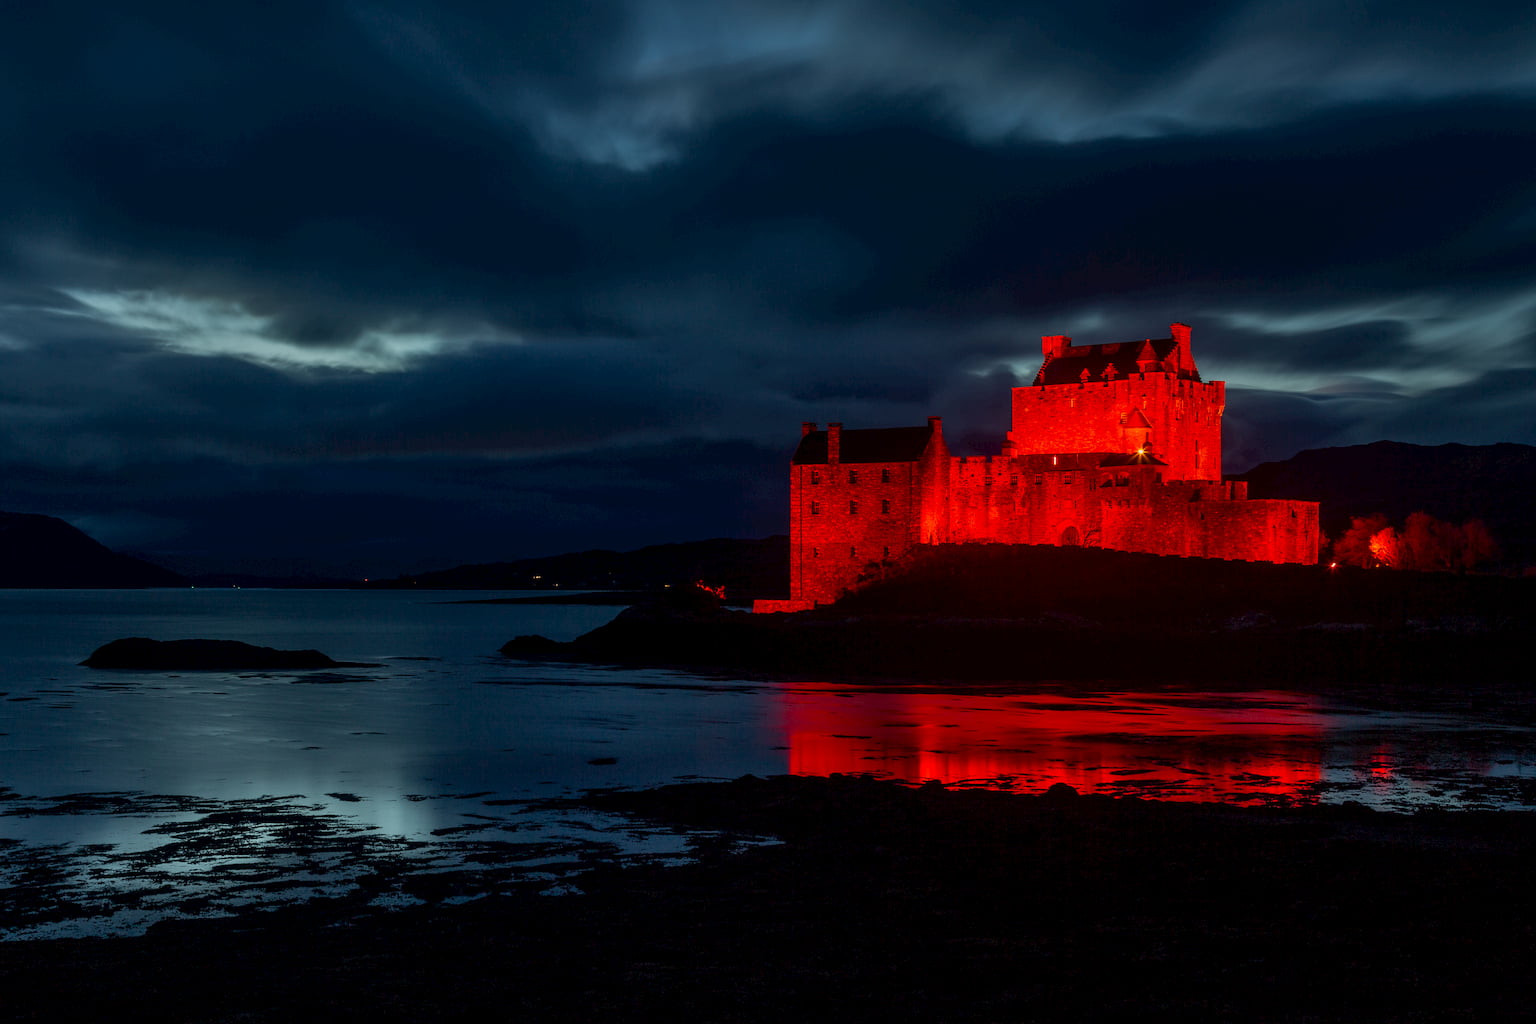 A landscape photograph of Eilean Donan castle in the Western Highlands of Scotland at night while lit up in red.